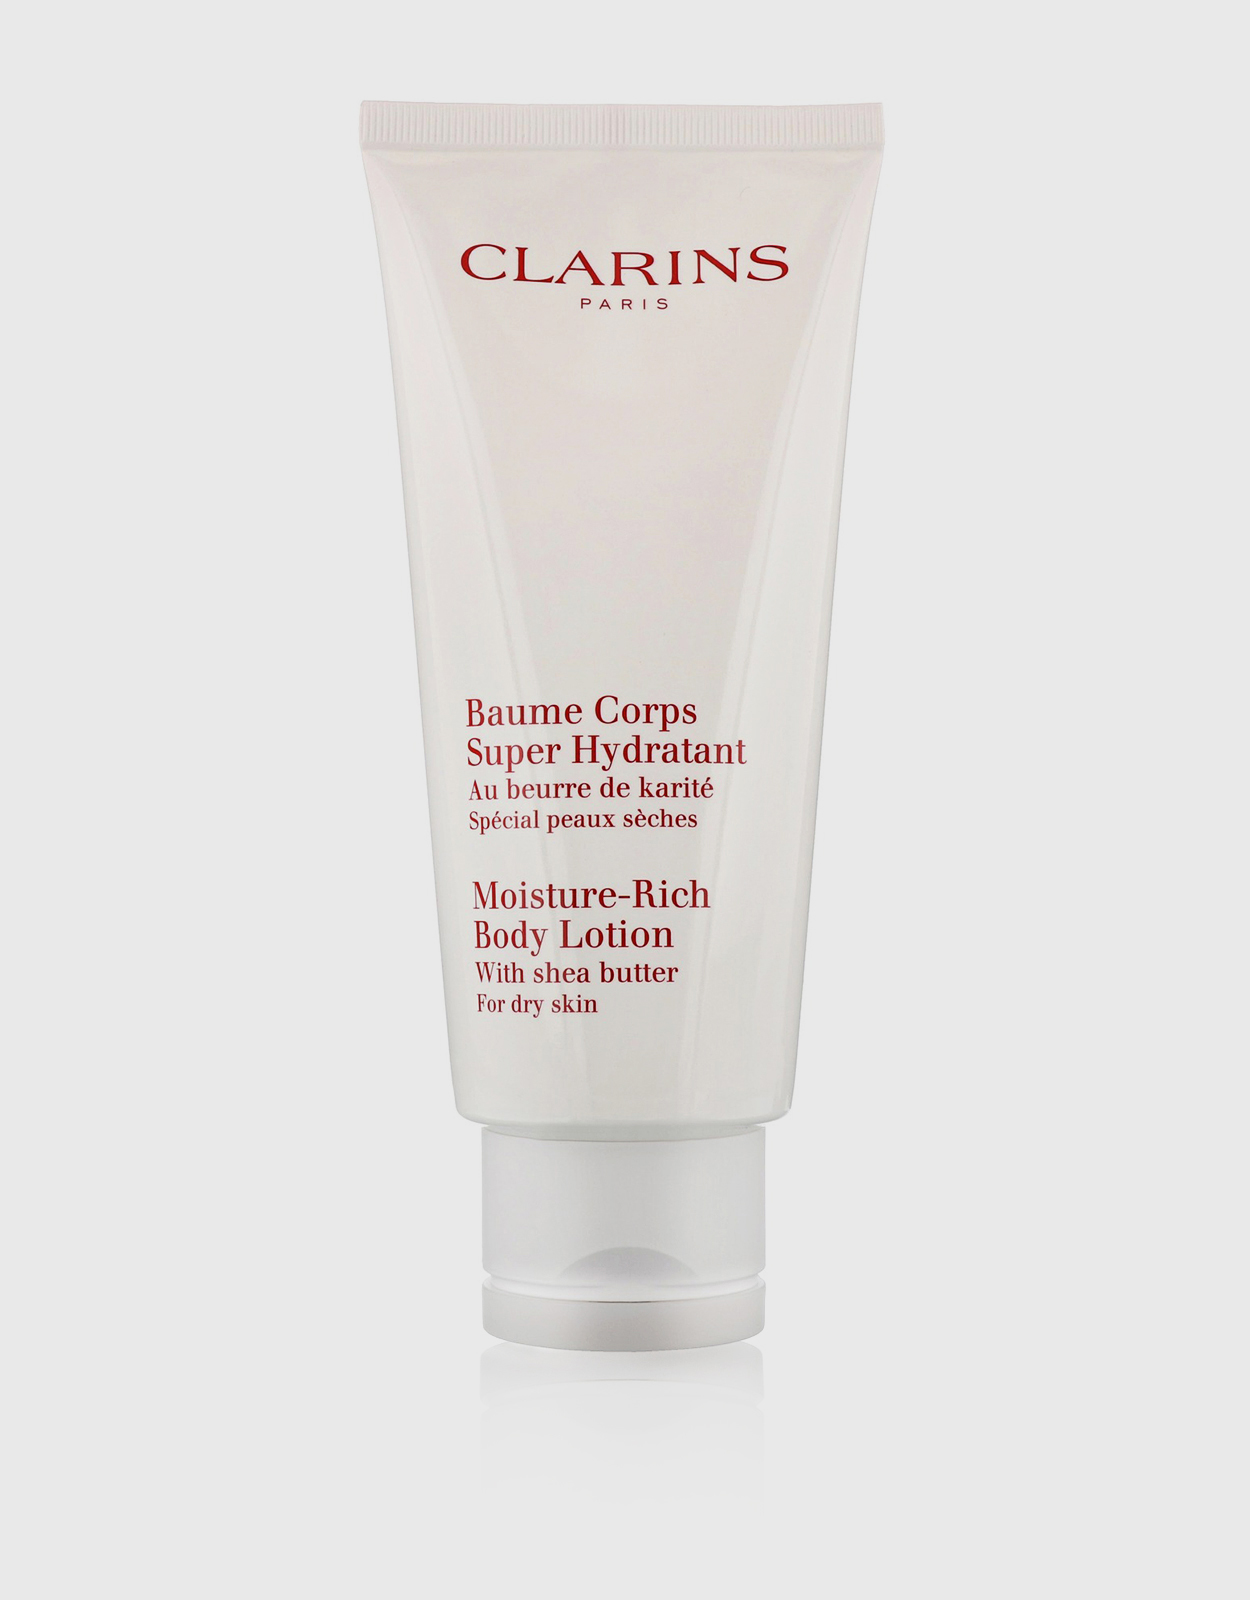 Clarins Moisture Rich Body Lotion with Shea Butter - For Dry Skin 200ml  (Bath and Bodycare,Bodycare)